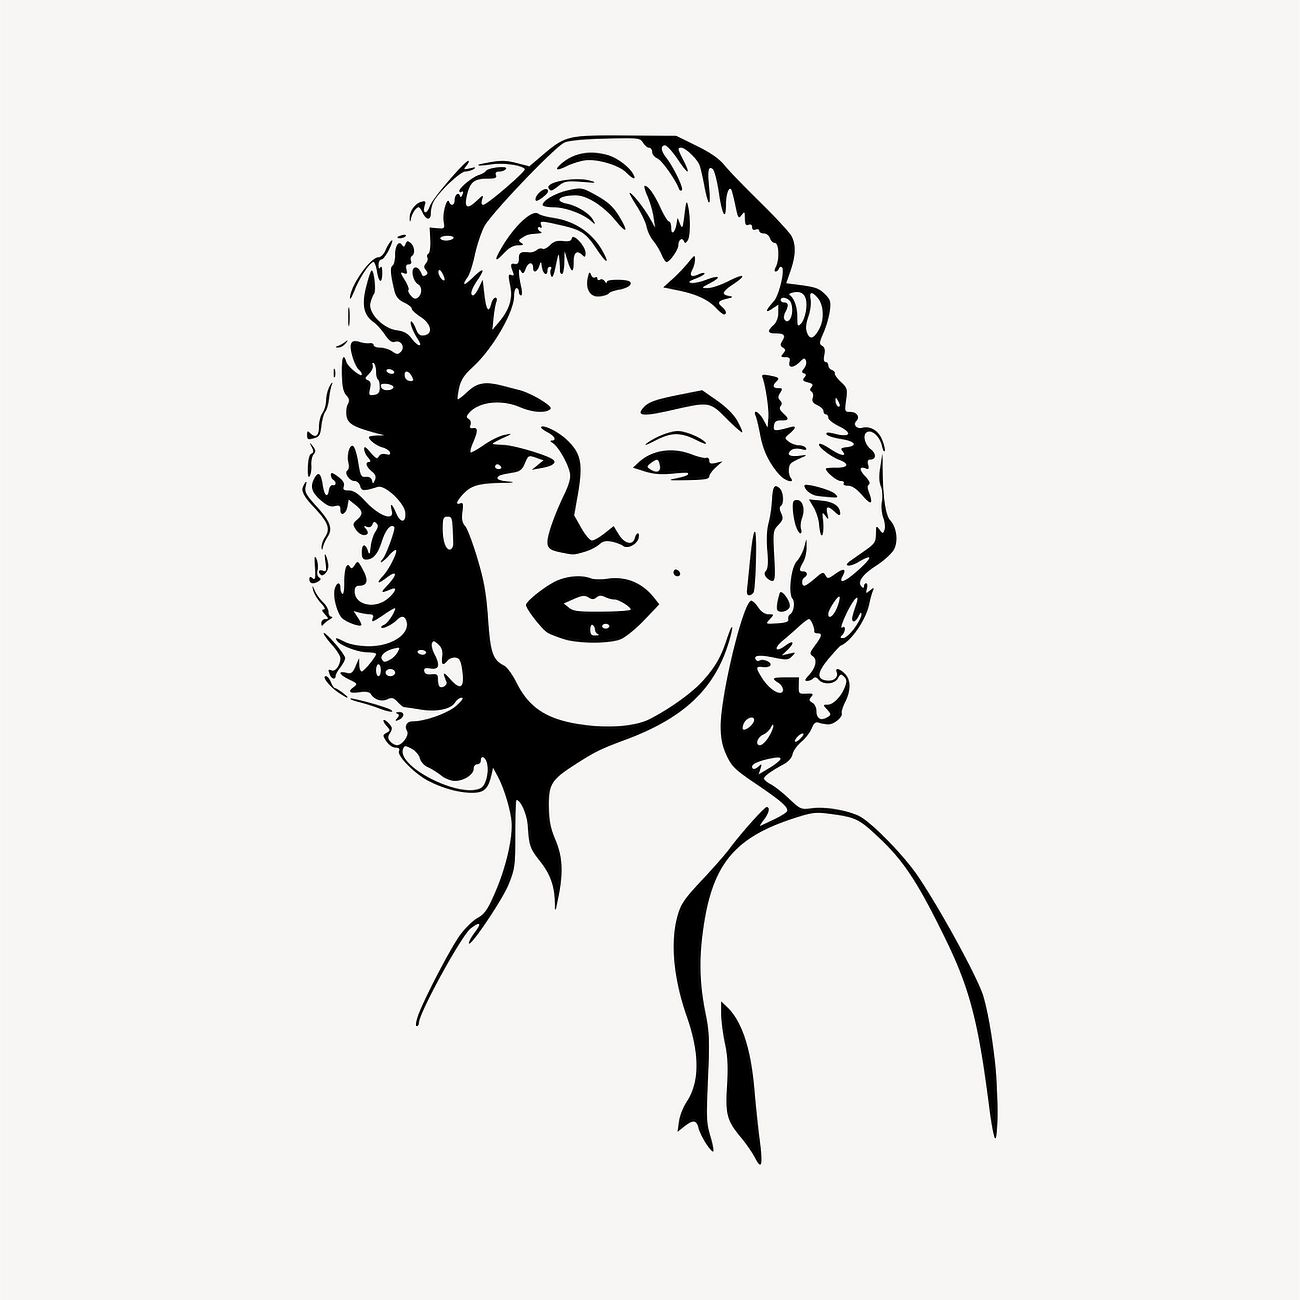 Marilyn Monroe drawing, famous actress